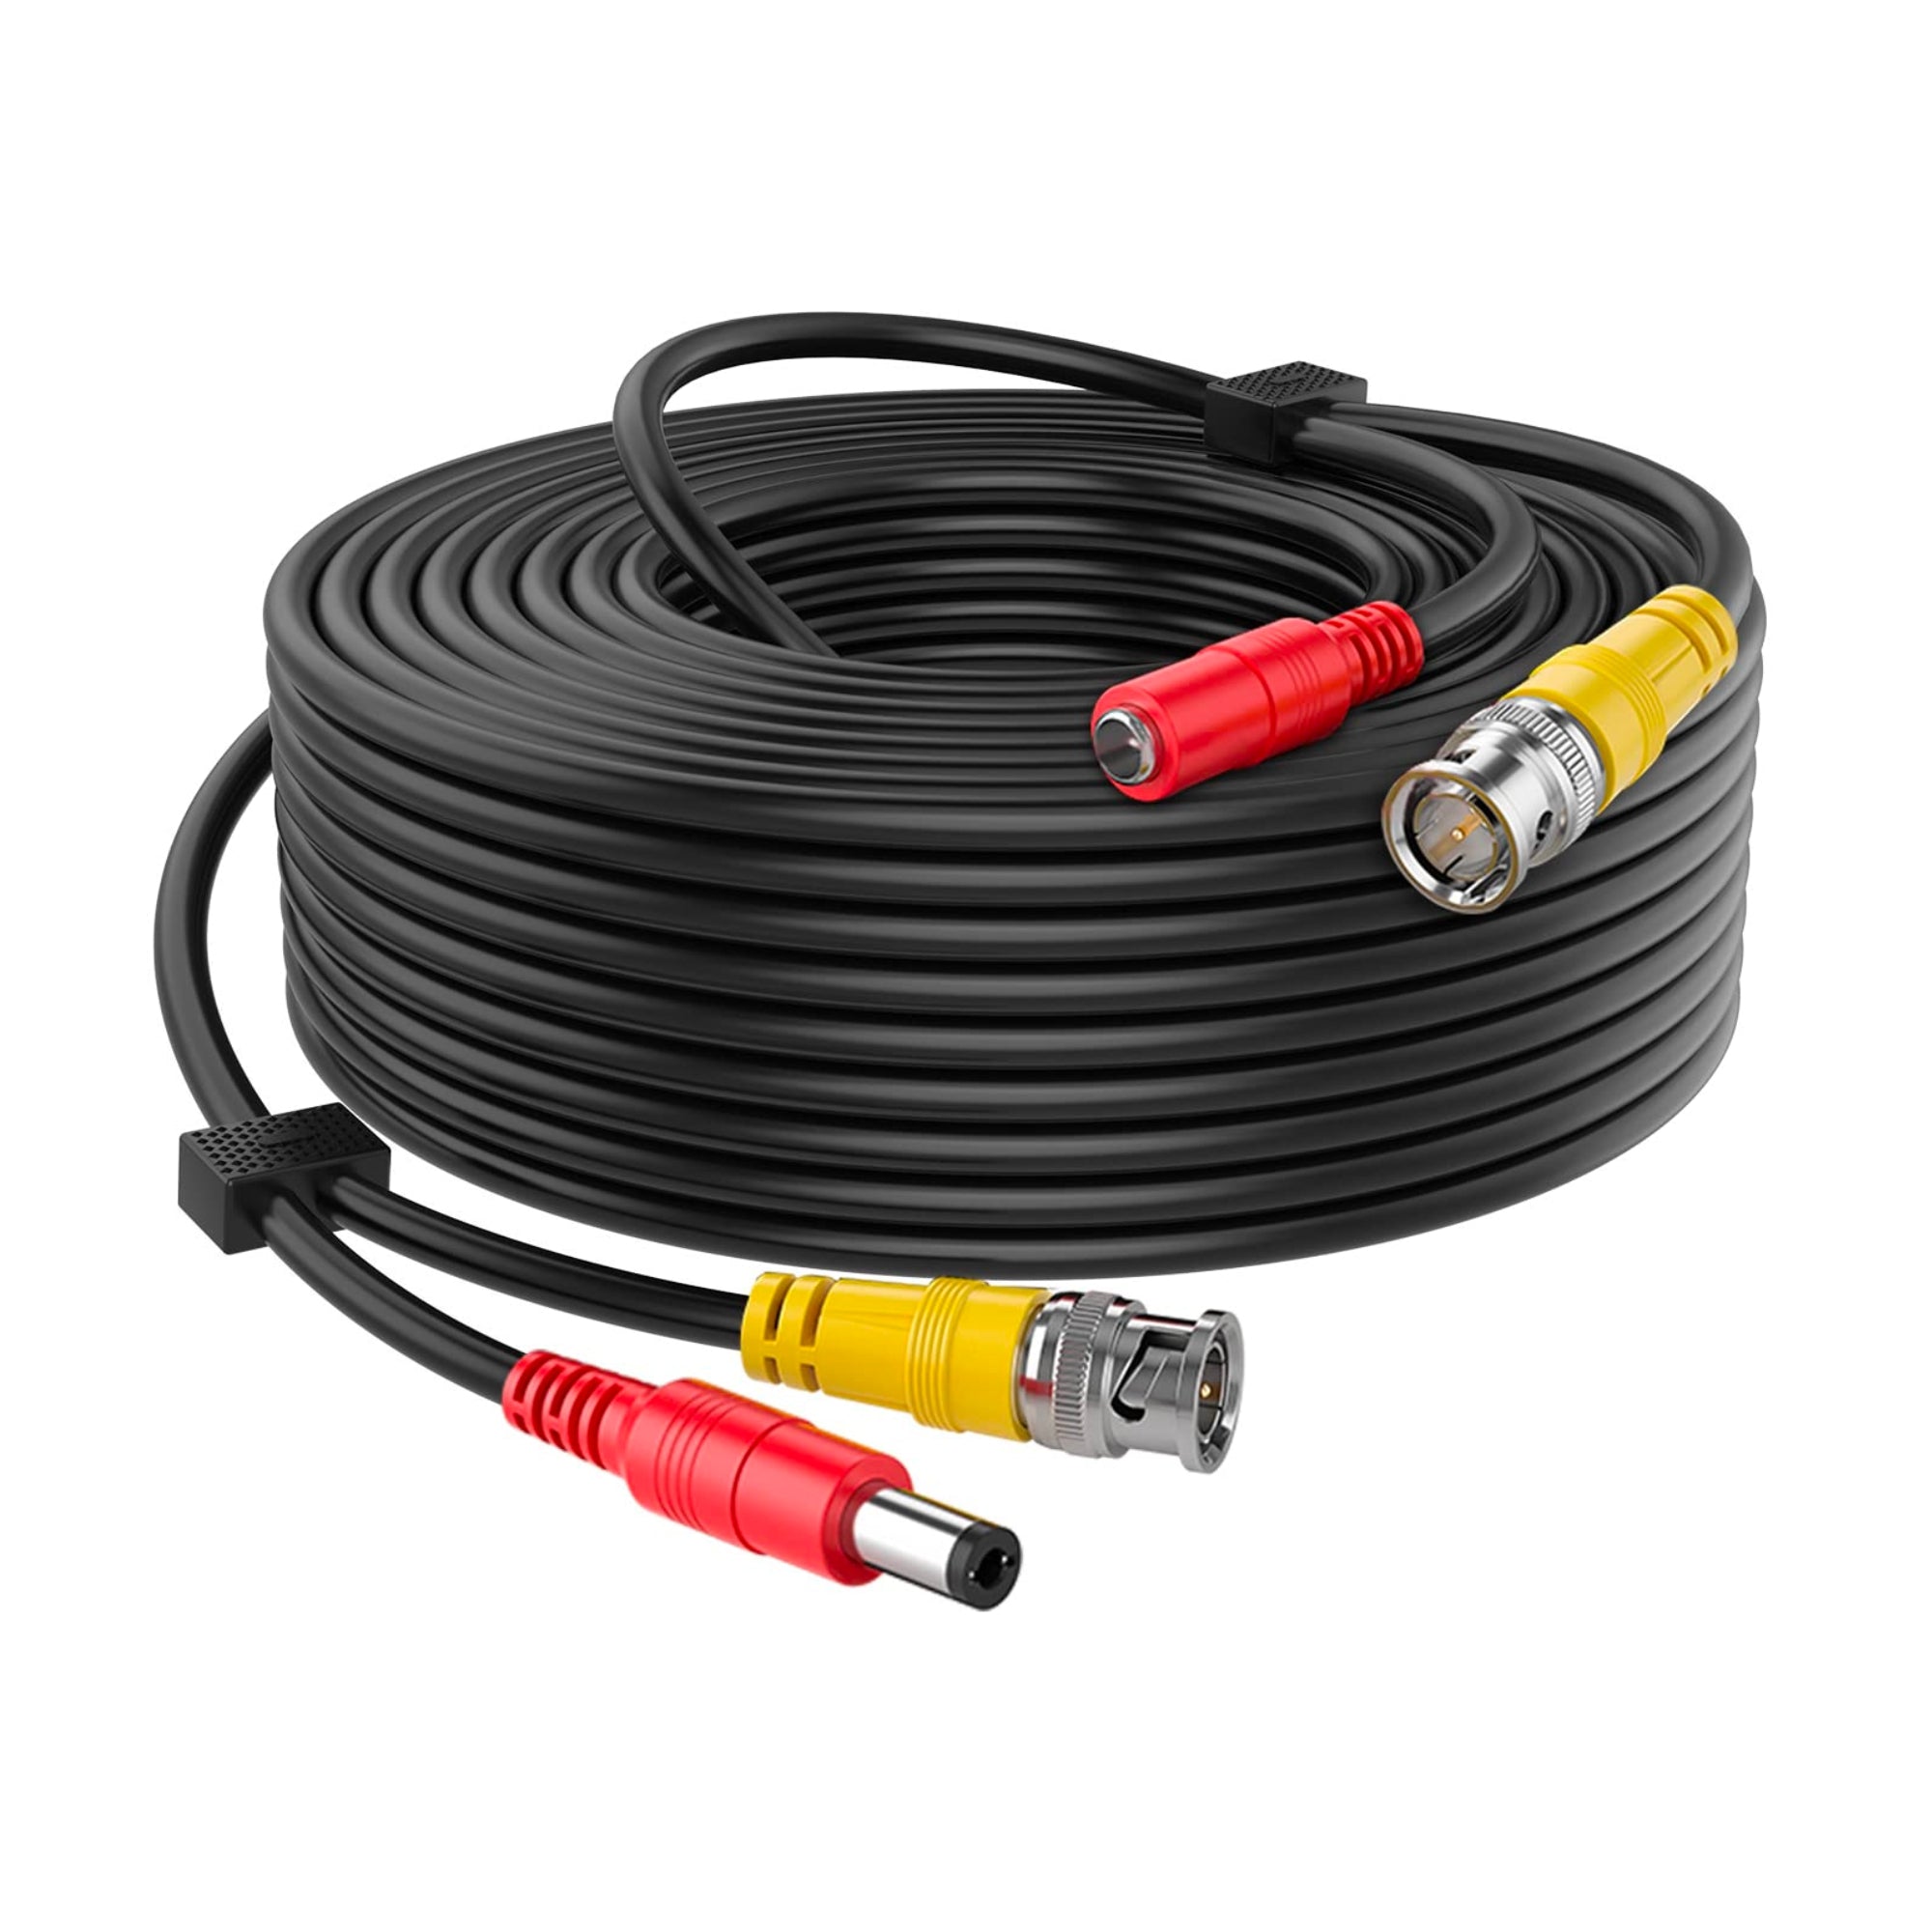 CCTV Camera Cable and Security Camera Wire Cord for DVR and Analog Cameras